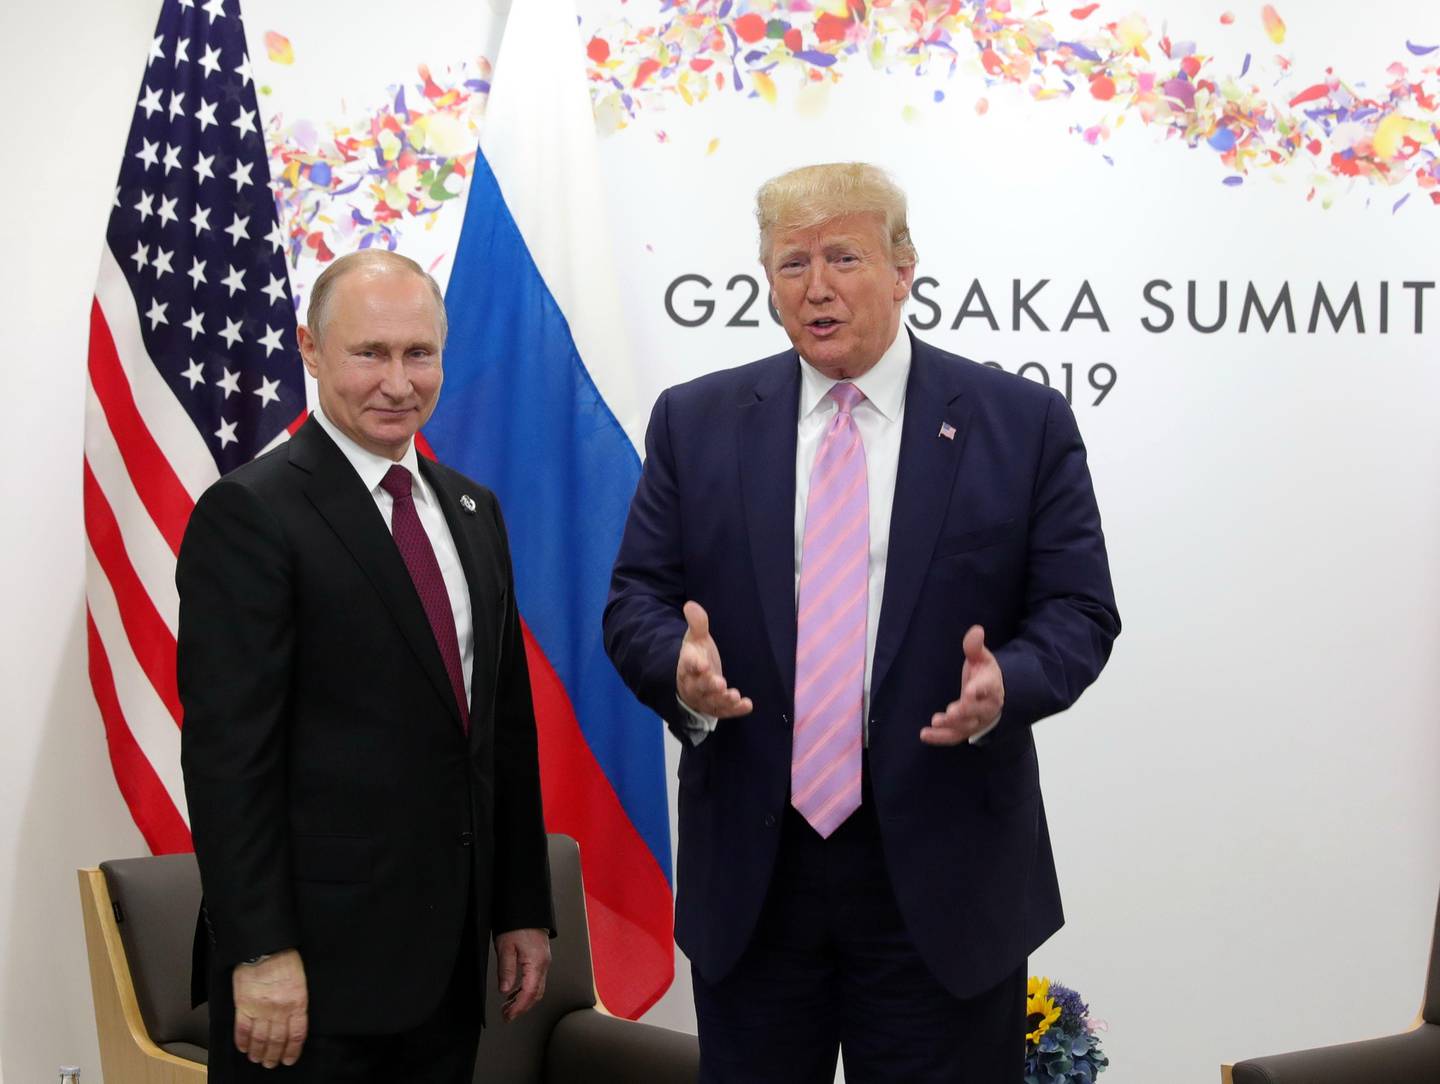 Russian President Vladimir Putin and US President Donald Trump hold a meeting on the sidelines of the G20 summit in Osaka on June 28, 2019. (Photo by Mikhail KLIMENTYEV / SPUTNIK / AFP)